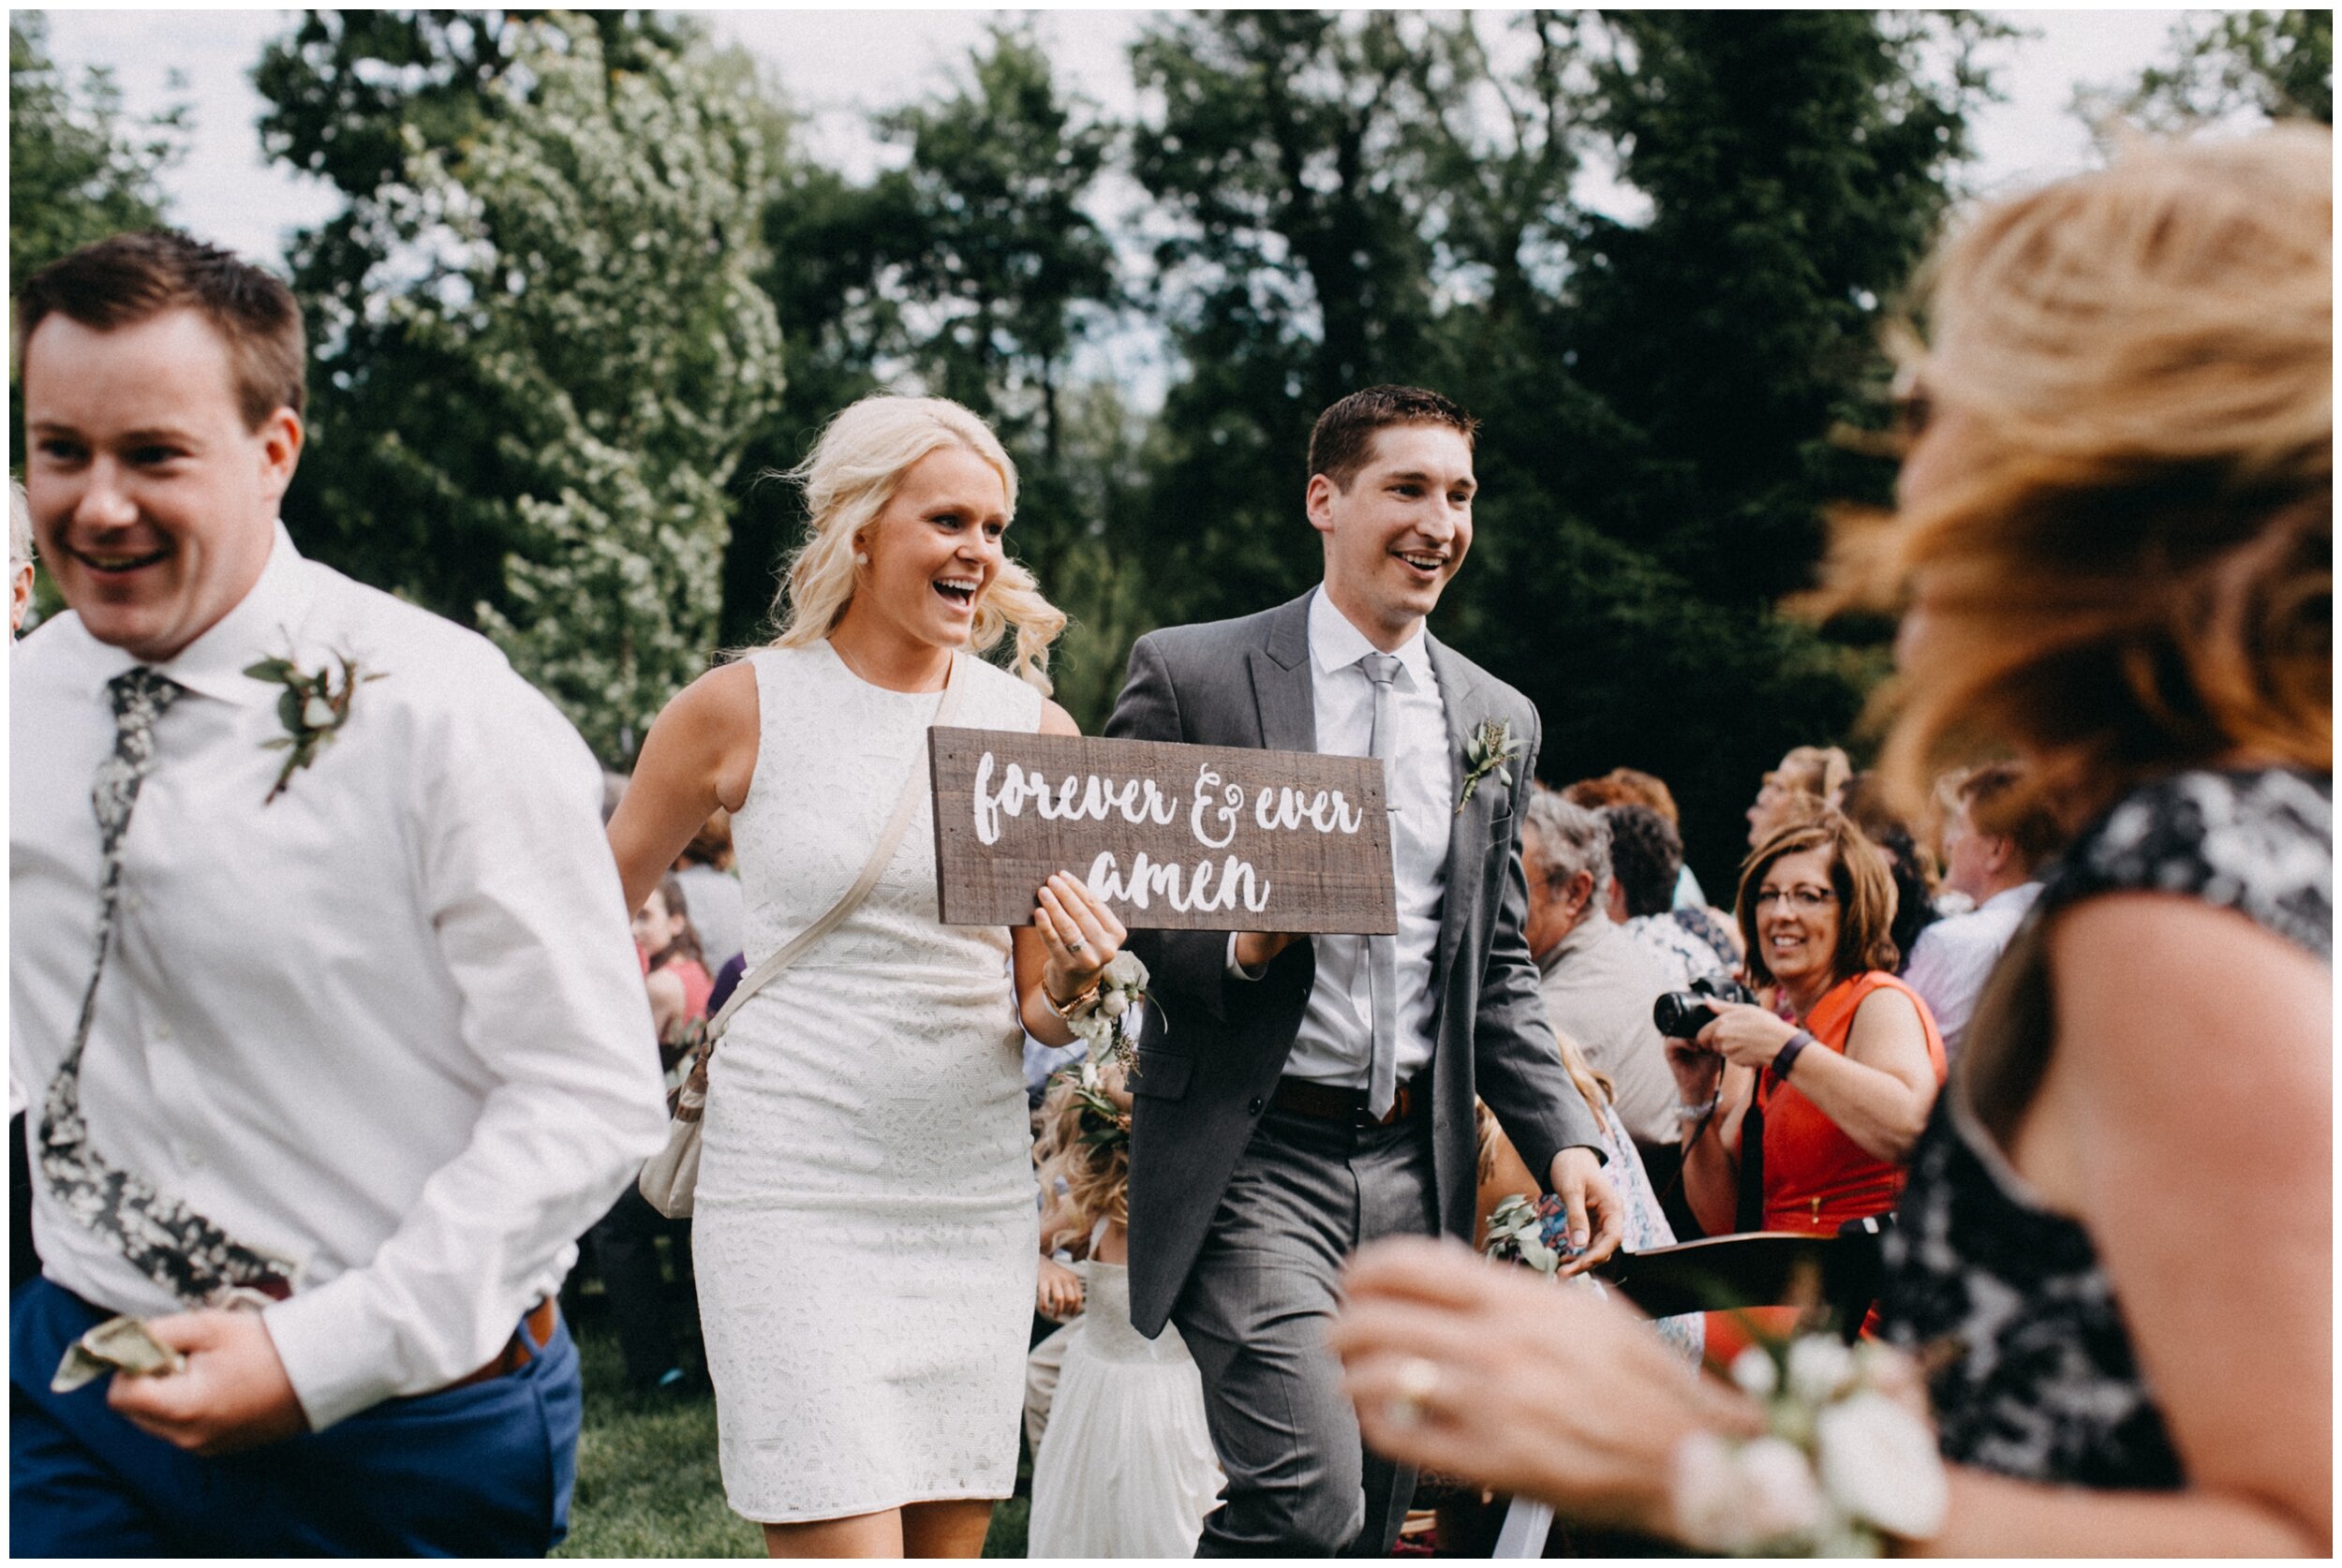 Bridesmaid and groomsman walking down aisle holding happily ever after sign